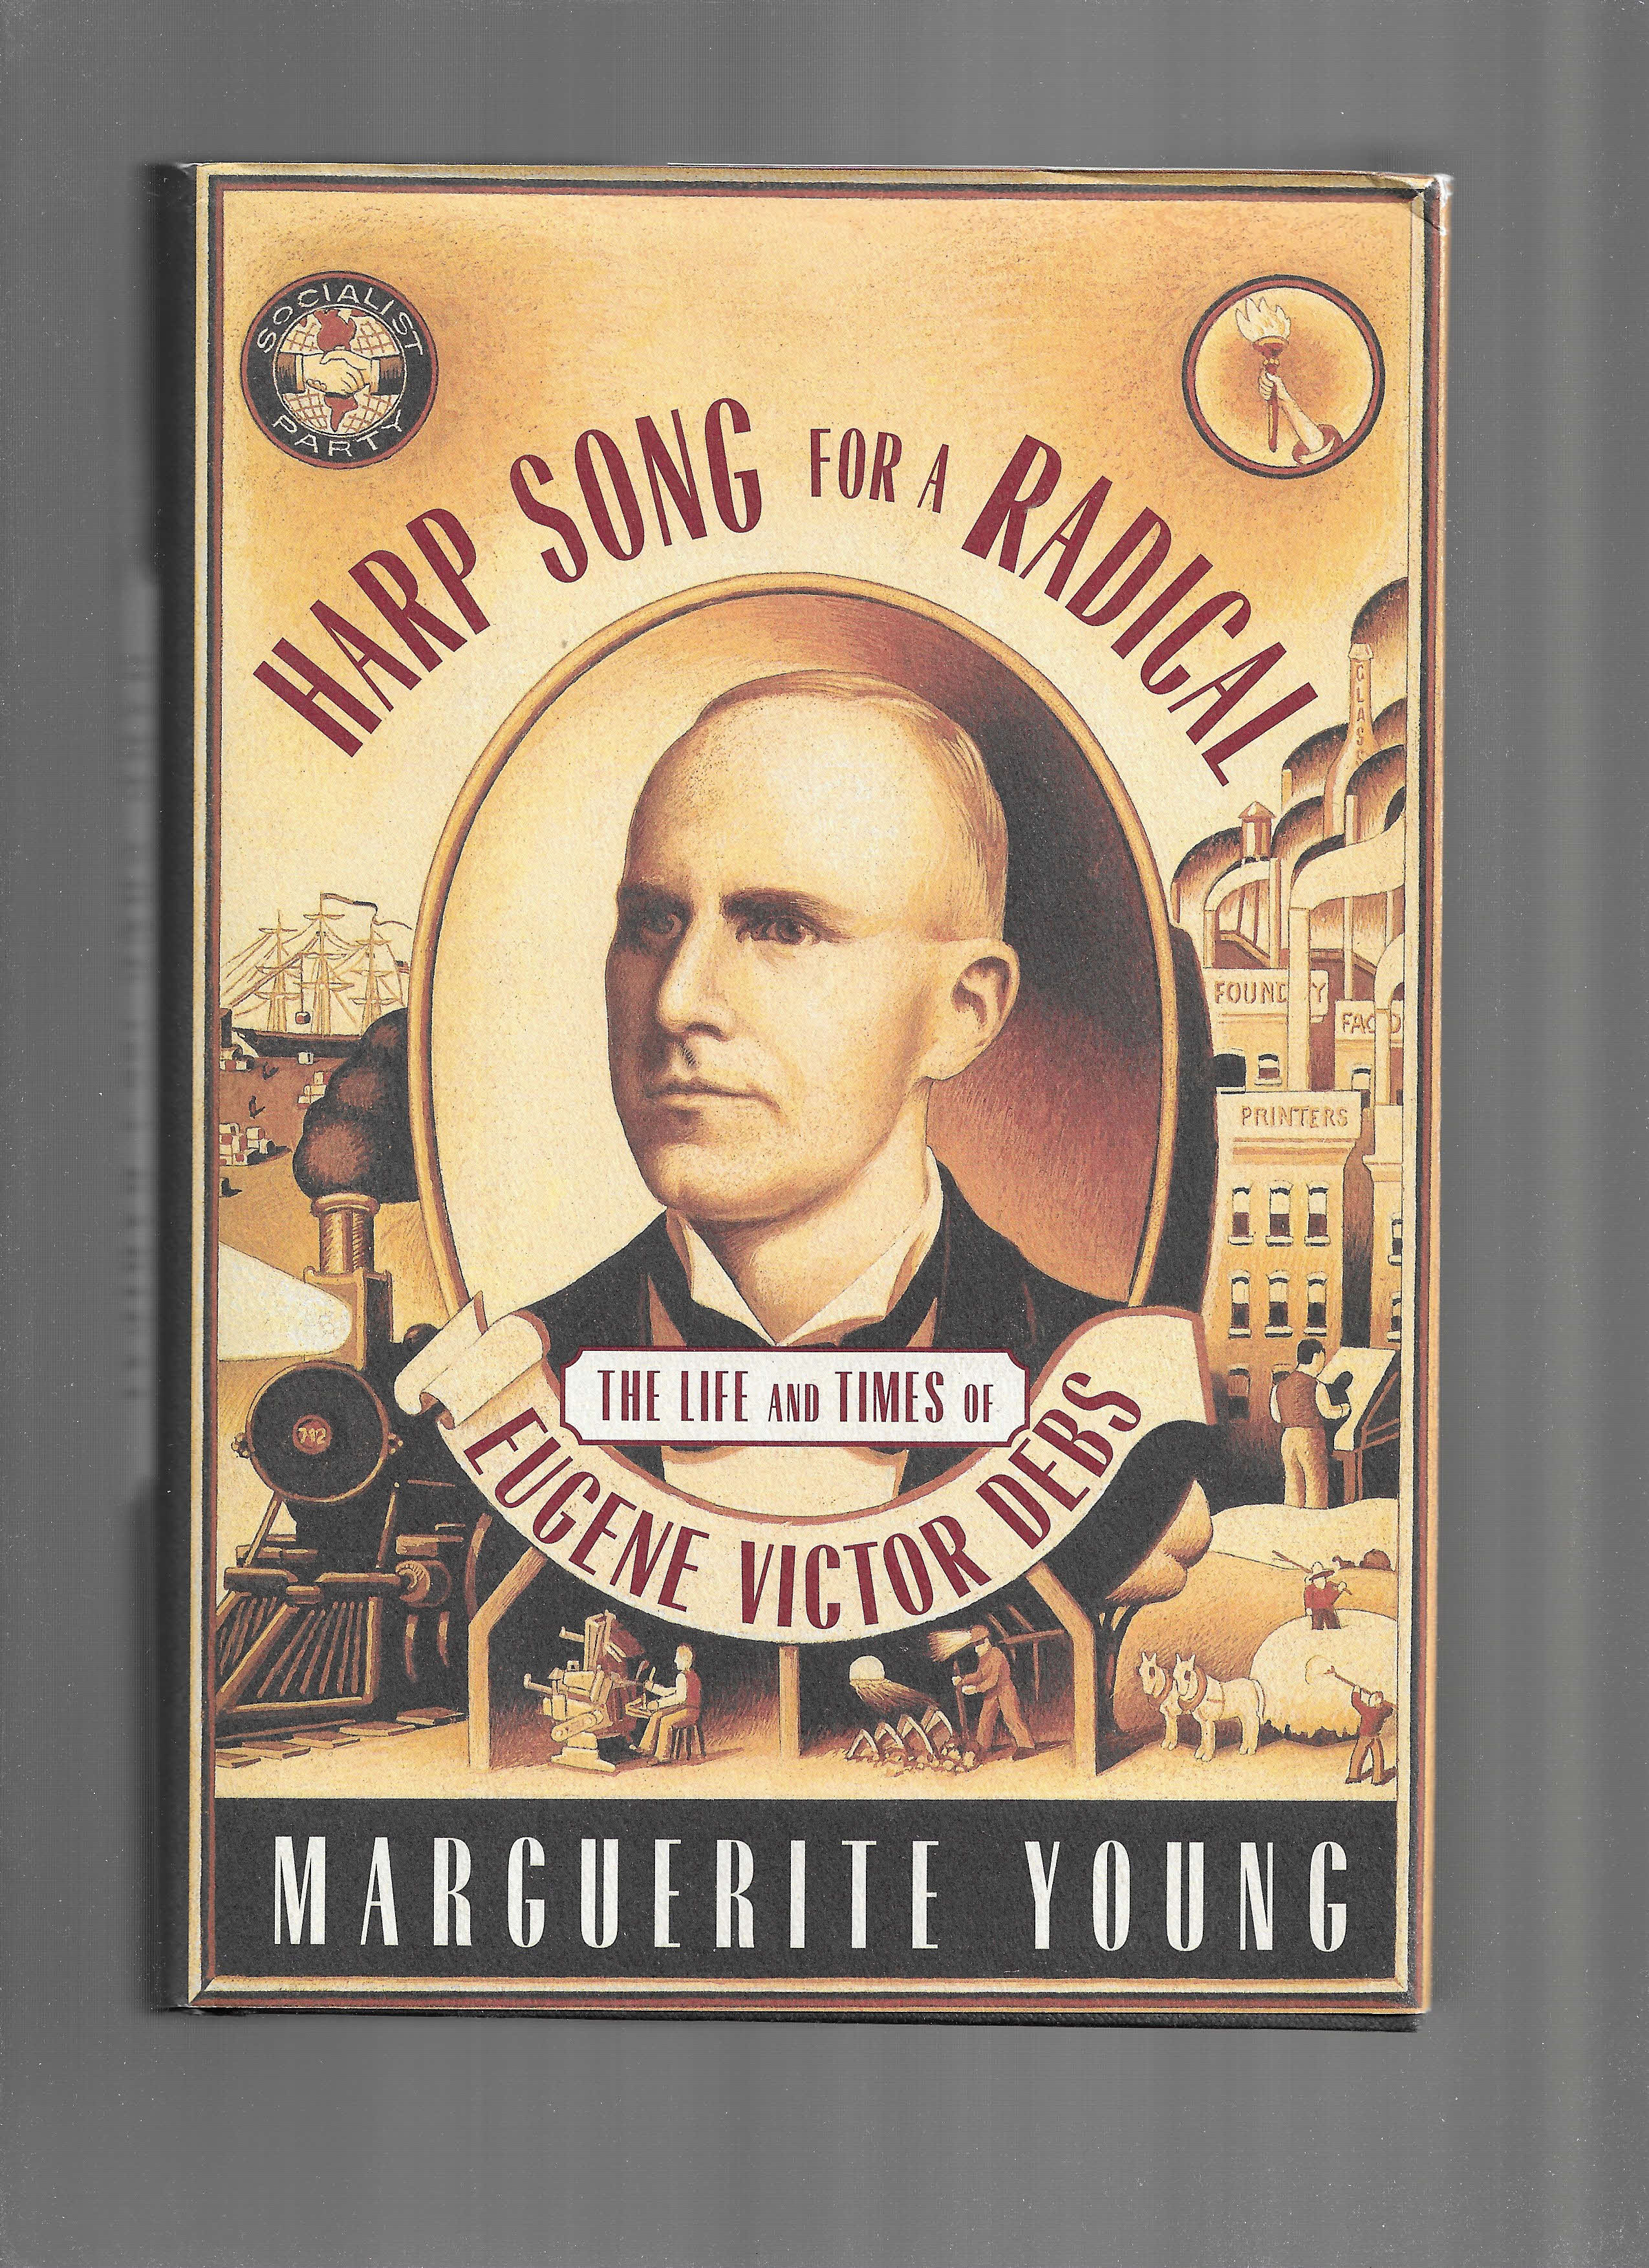 HARP SONG FOR A RADICAL: The Life And Times Of Eugene Victor Debs. Edited And With An Introduction By Charles Ruas. - Young, Marguerite